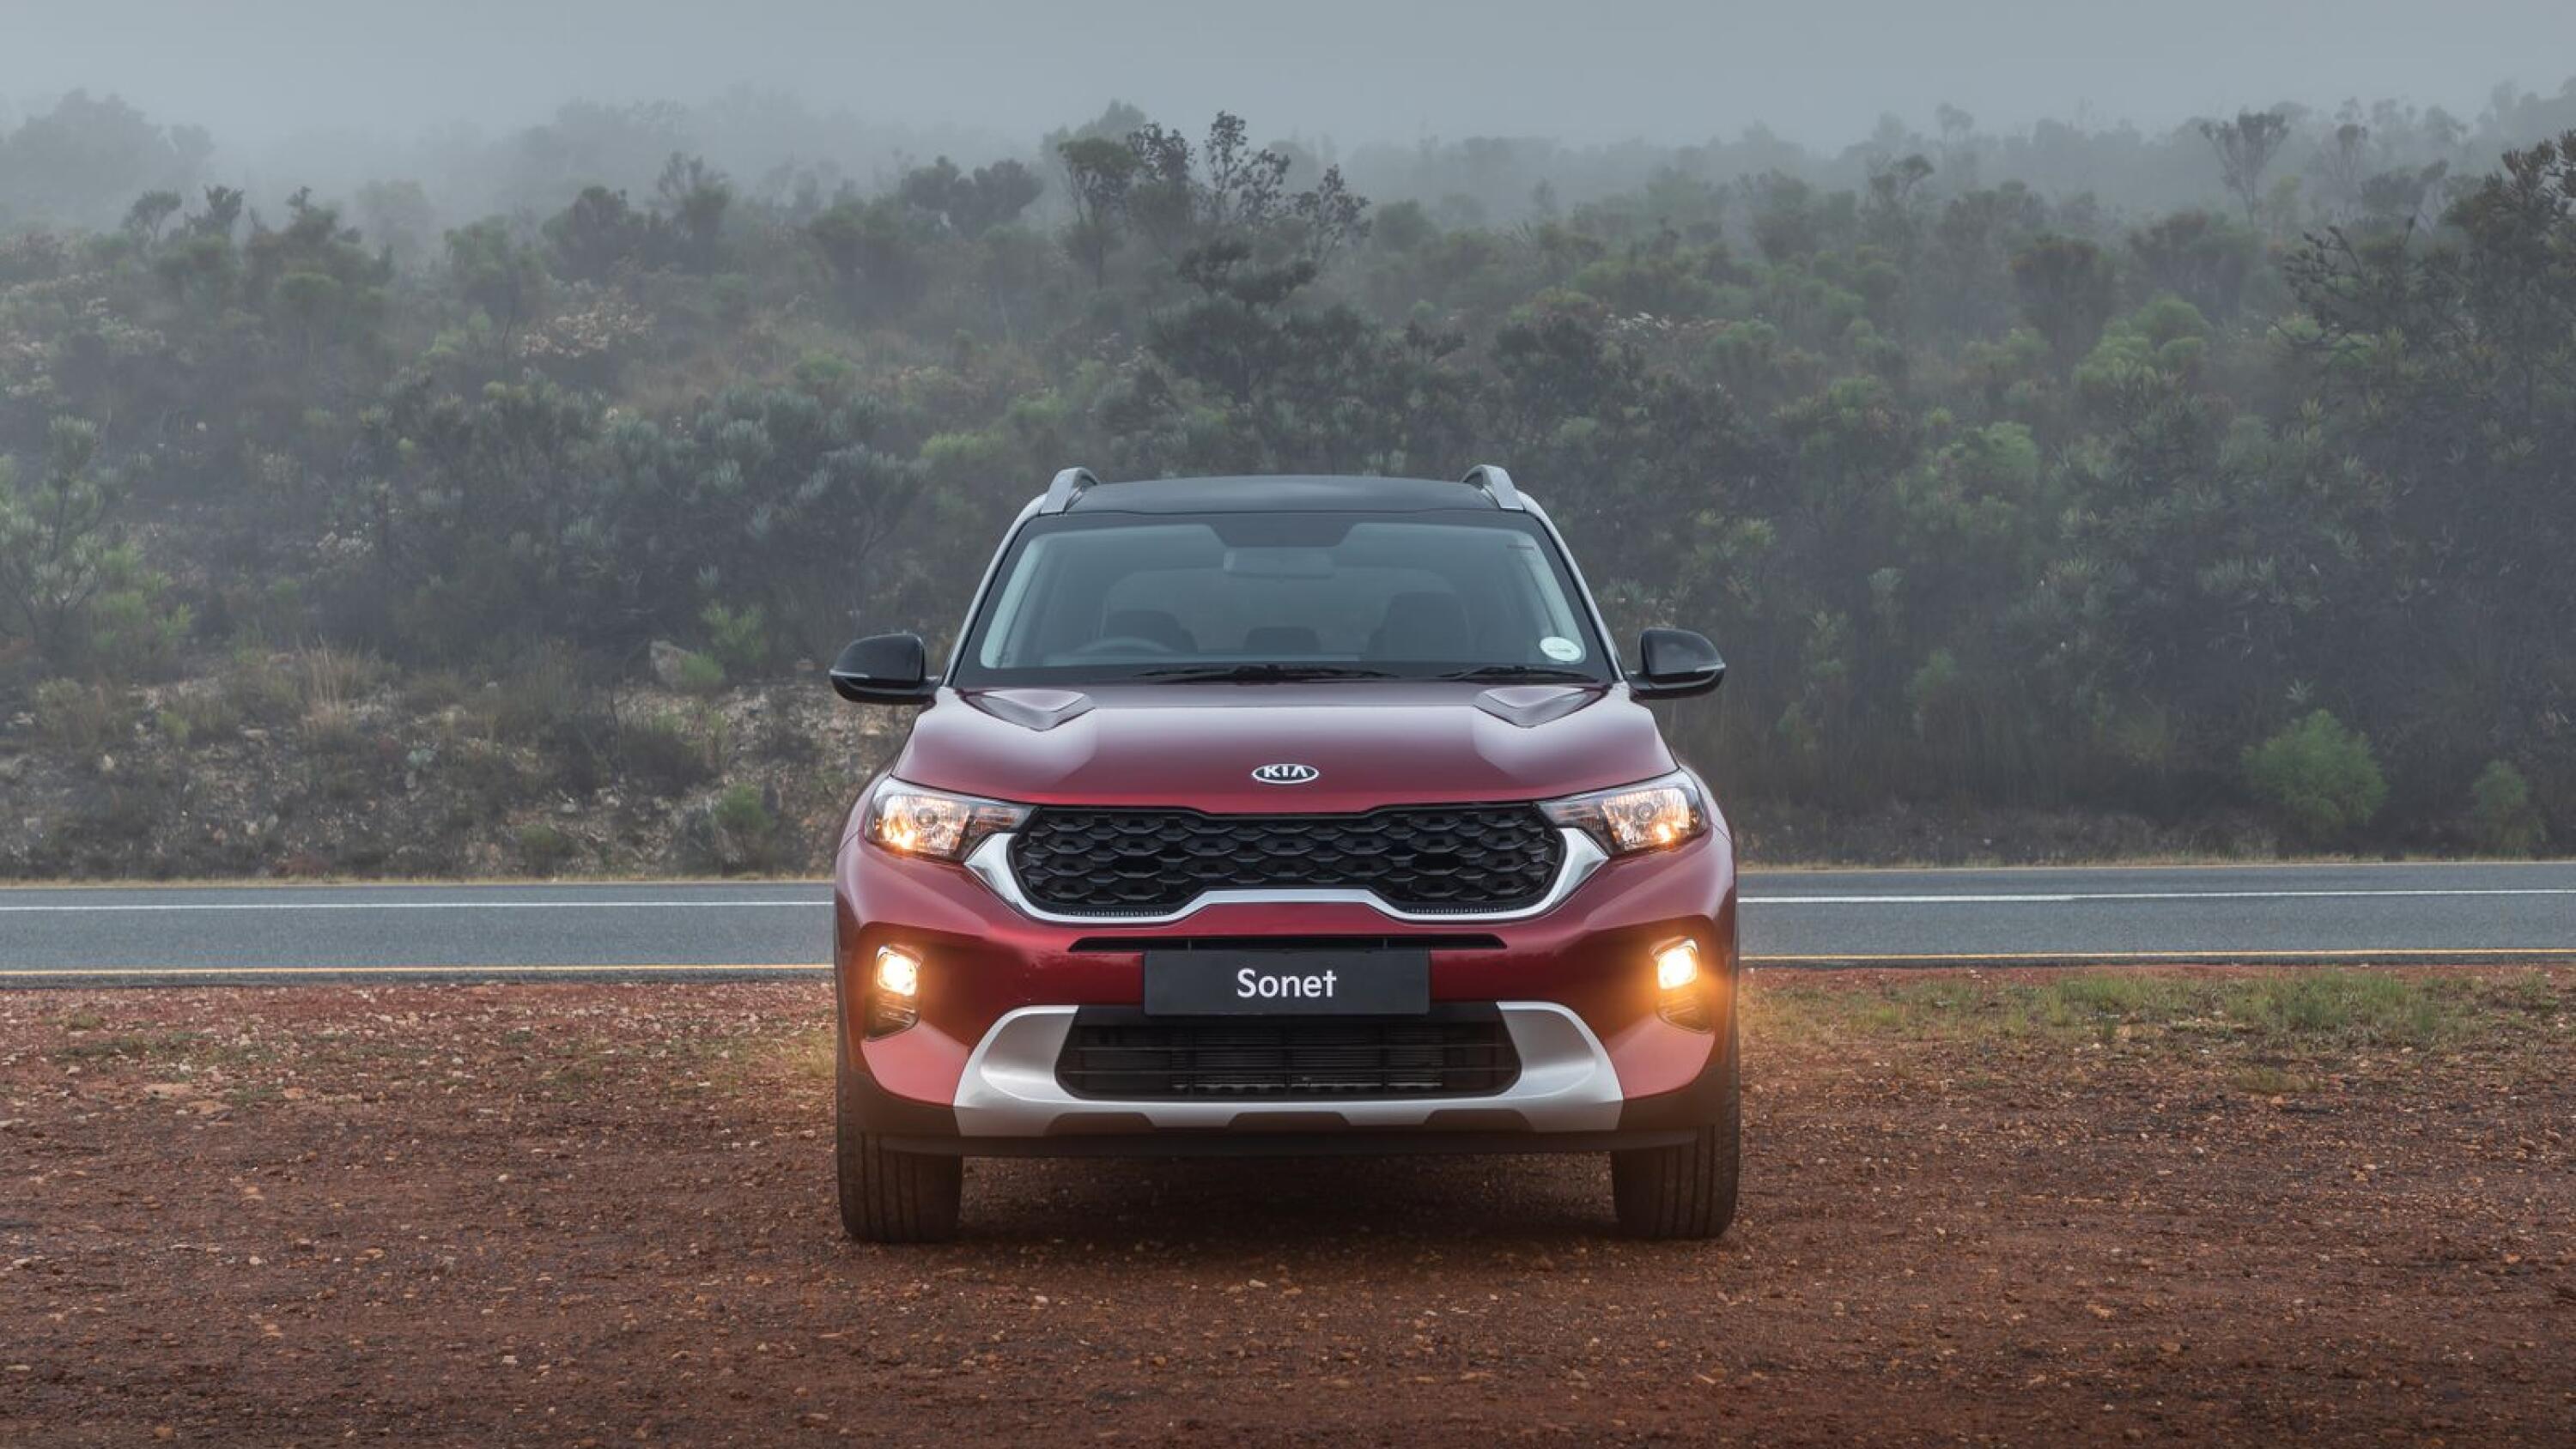 2021 KIA Sonet has just gone on sale in South Africa